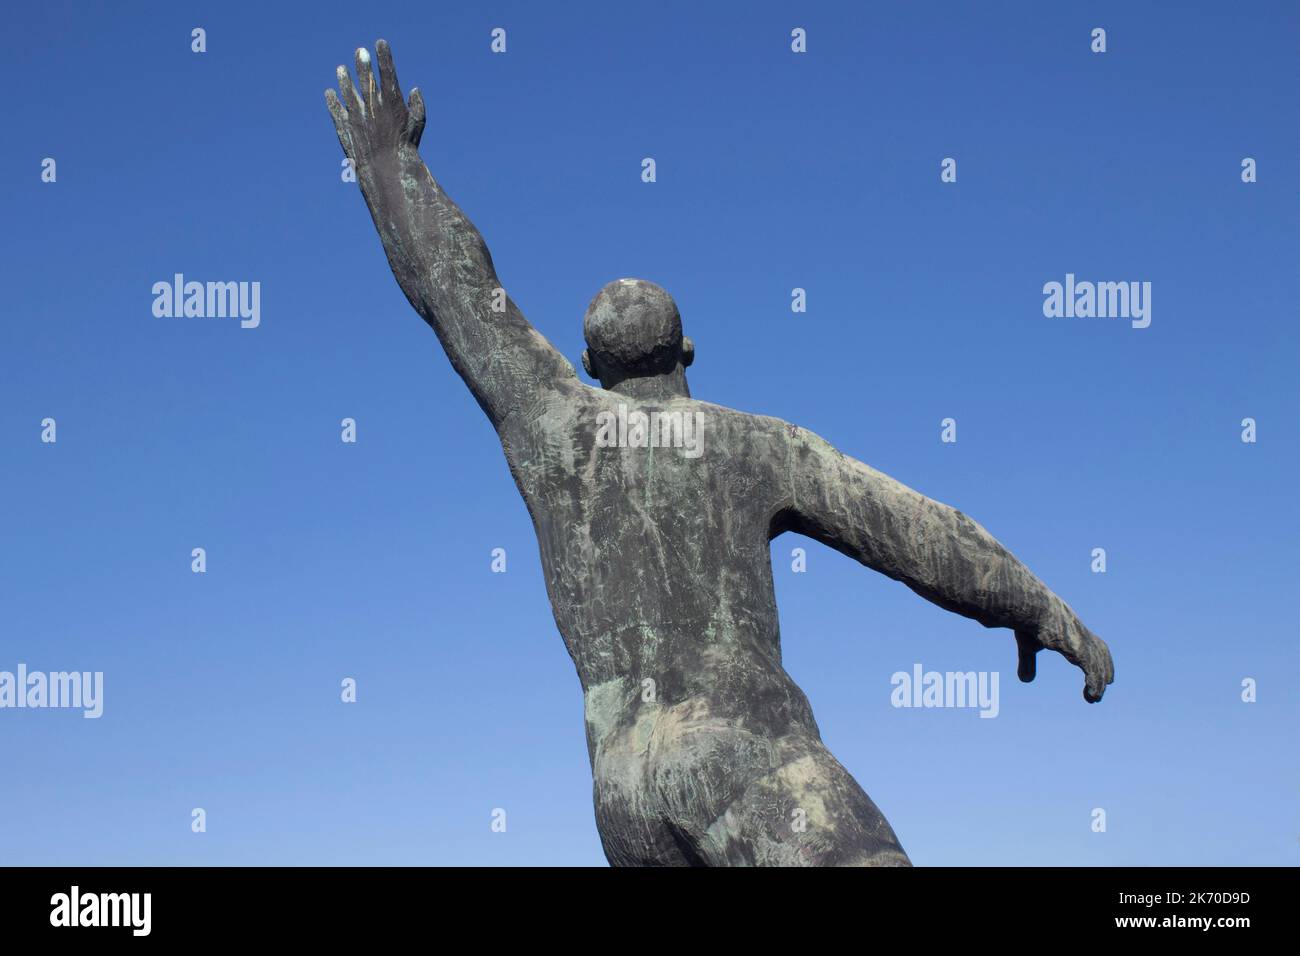 Statue of a heroic worker Memento Park an open-air museum dedicated to monumental statues  Hungary's Communist period, Budapest, Hungary, Stock Photo